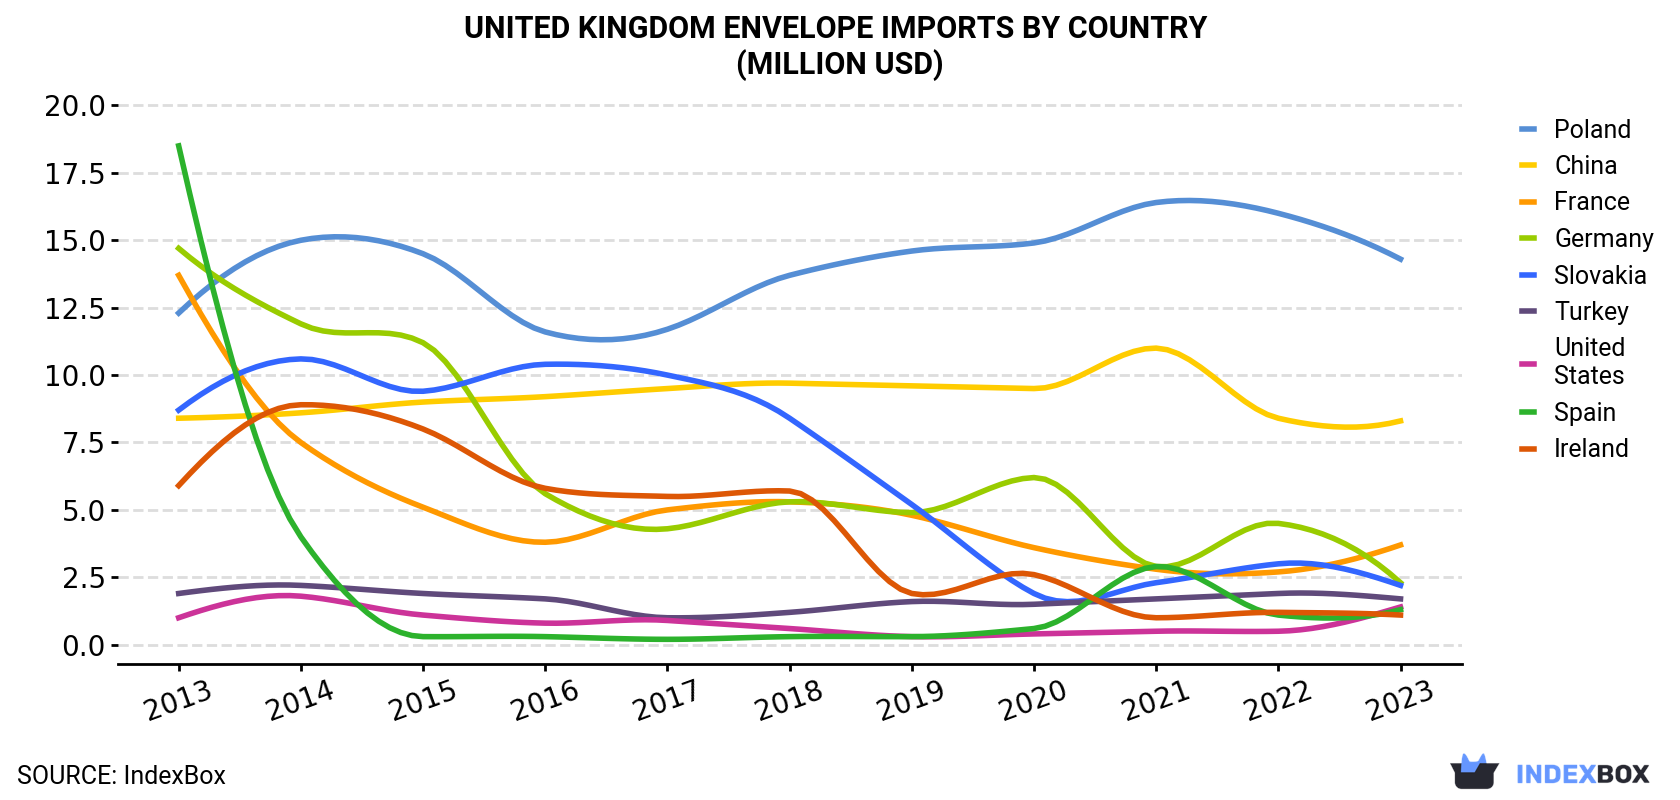 United Kingdom Envelope Imports By Country (Million USD)